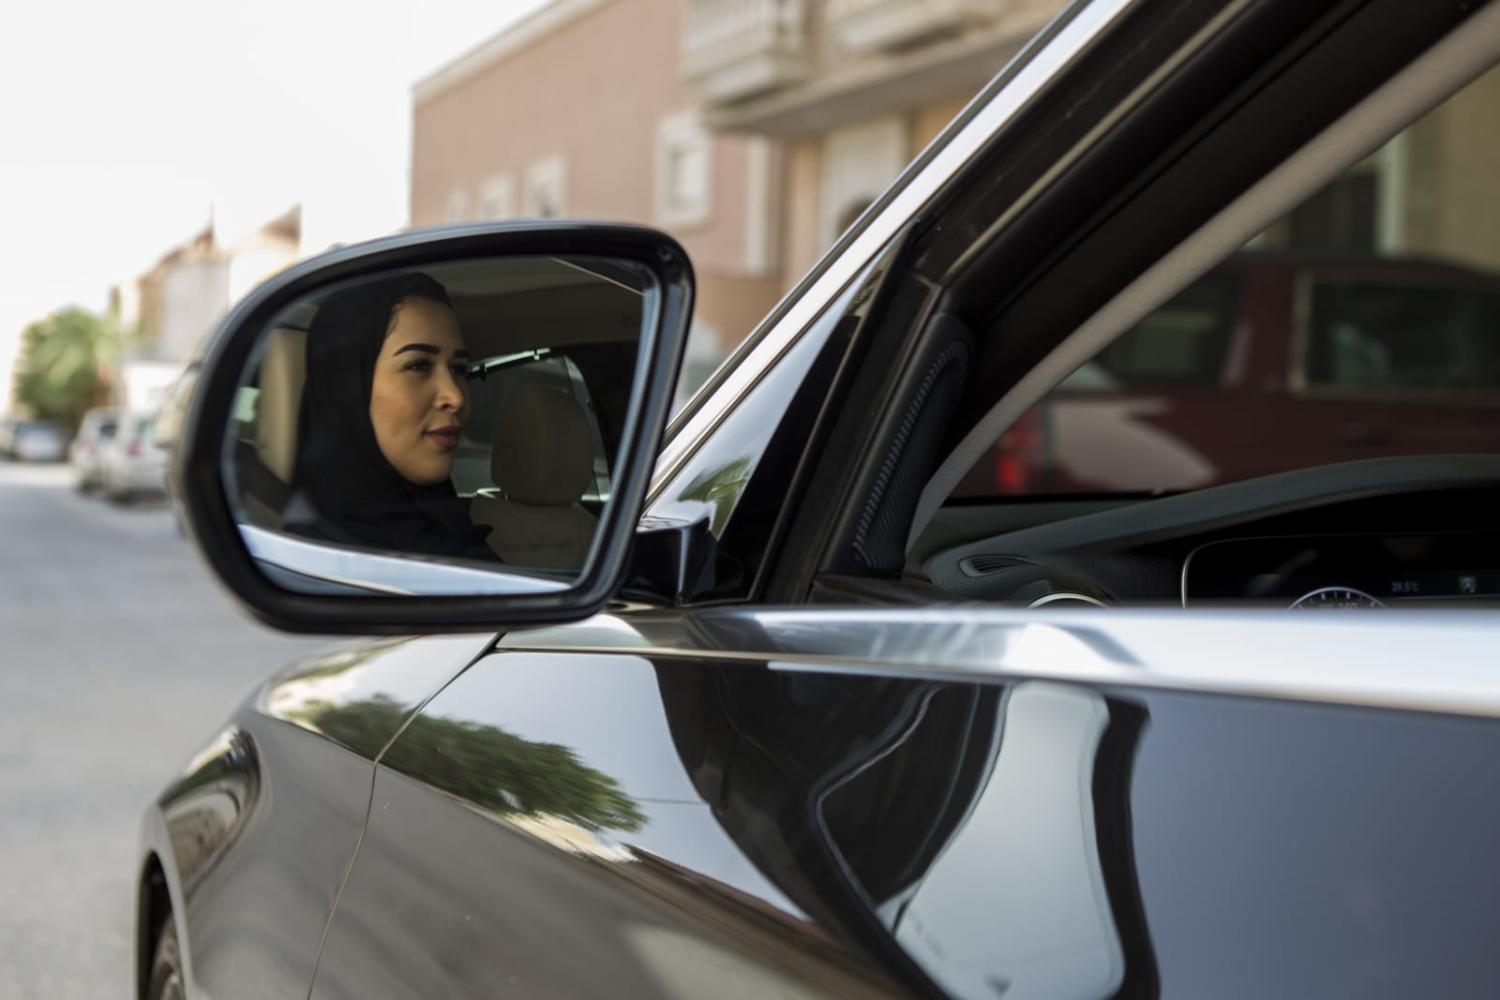 Allowing women to drive is one of a series of changes made in Saudi Arabia over recent years (Gehad Hamdy via Getty Images)